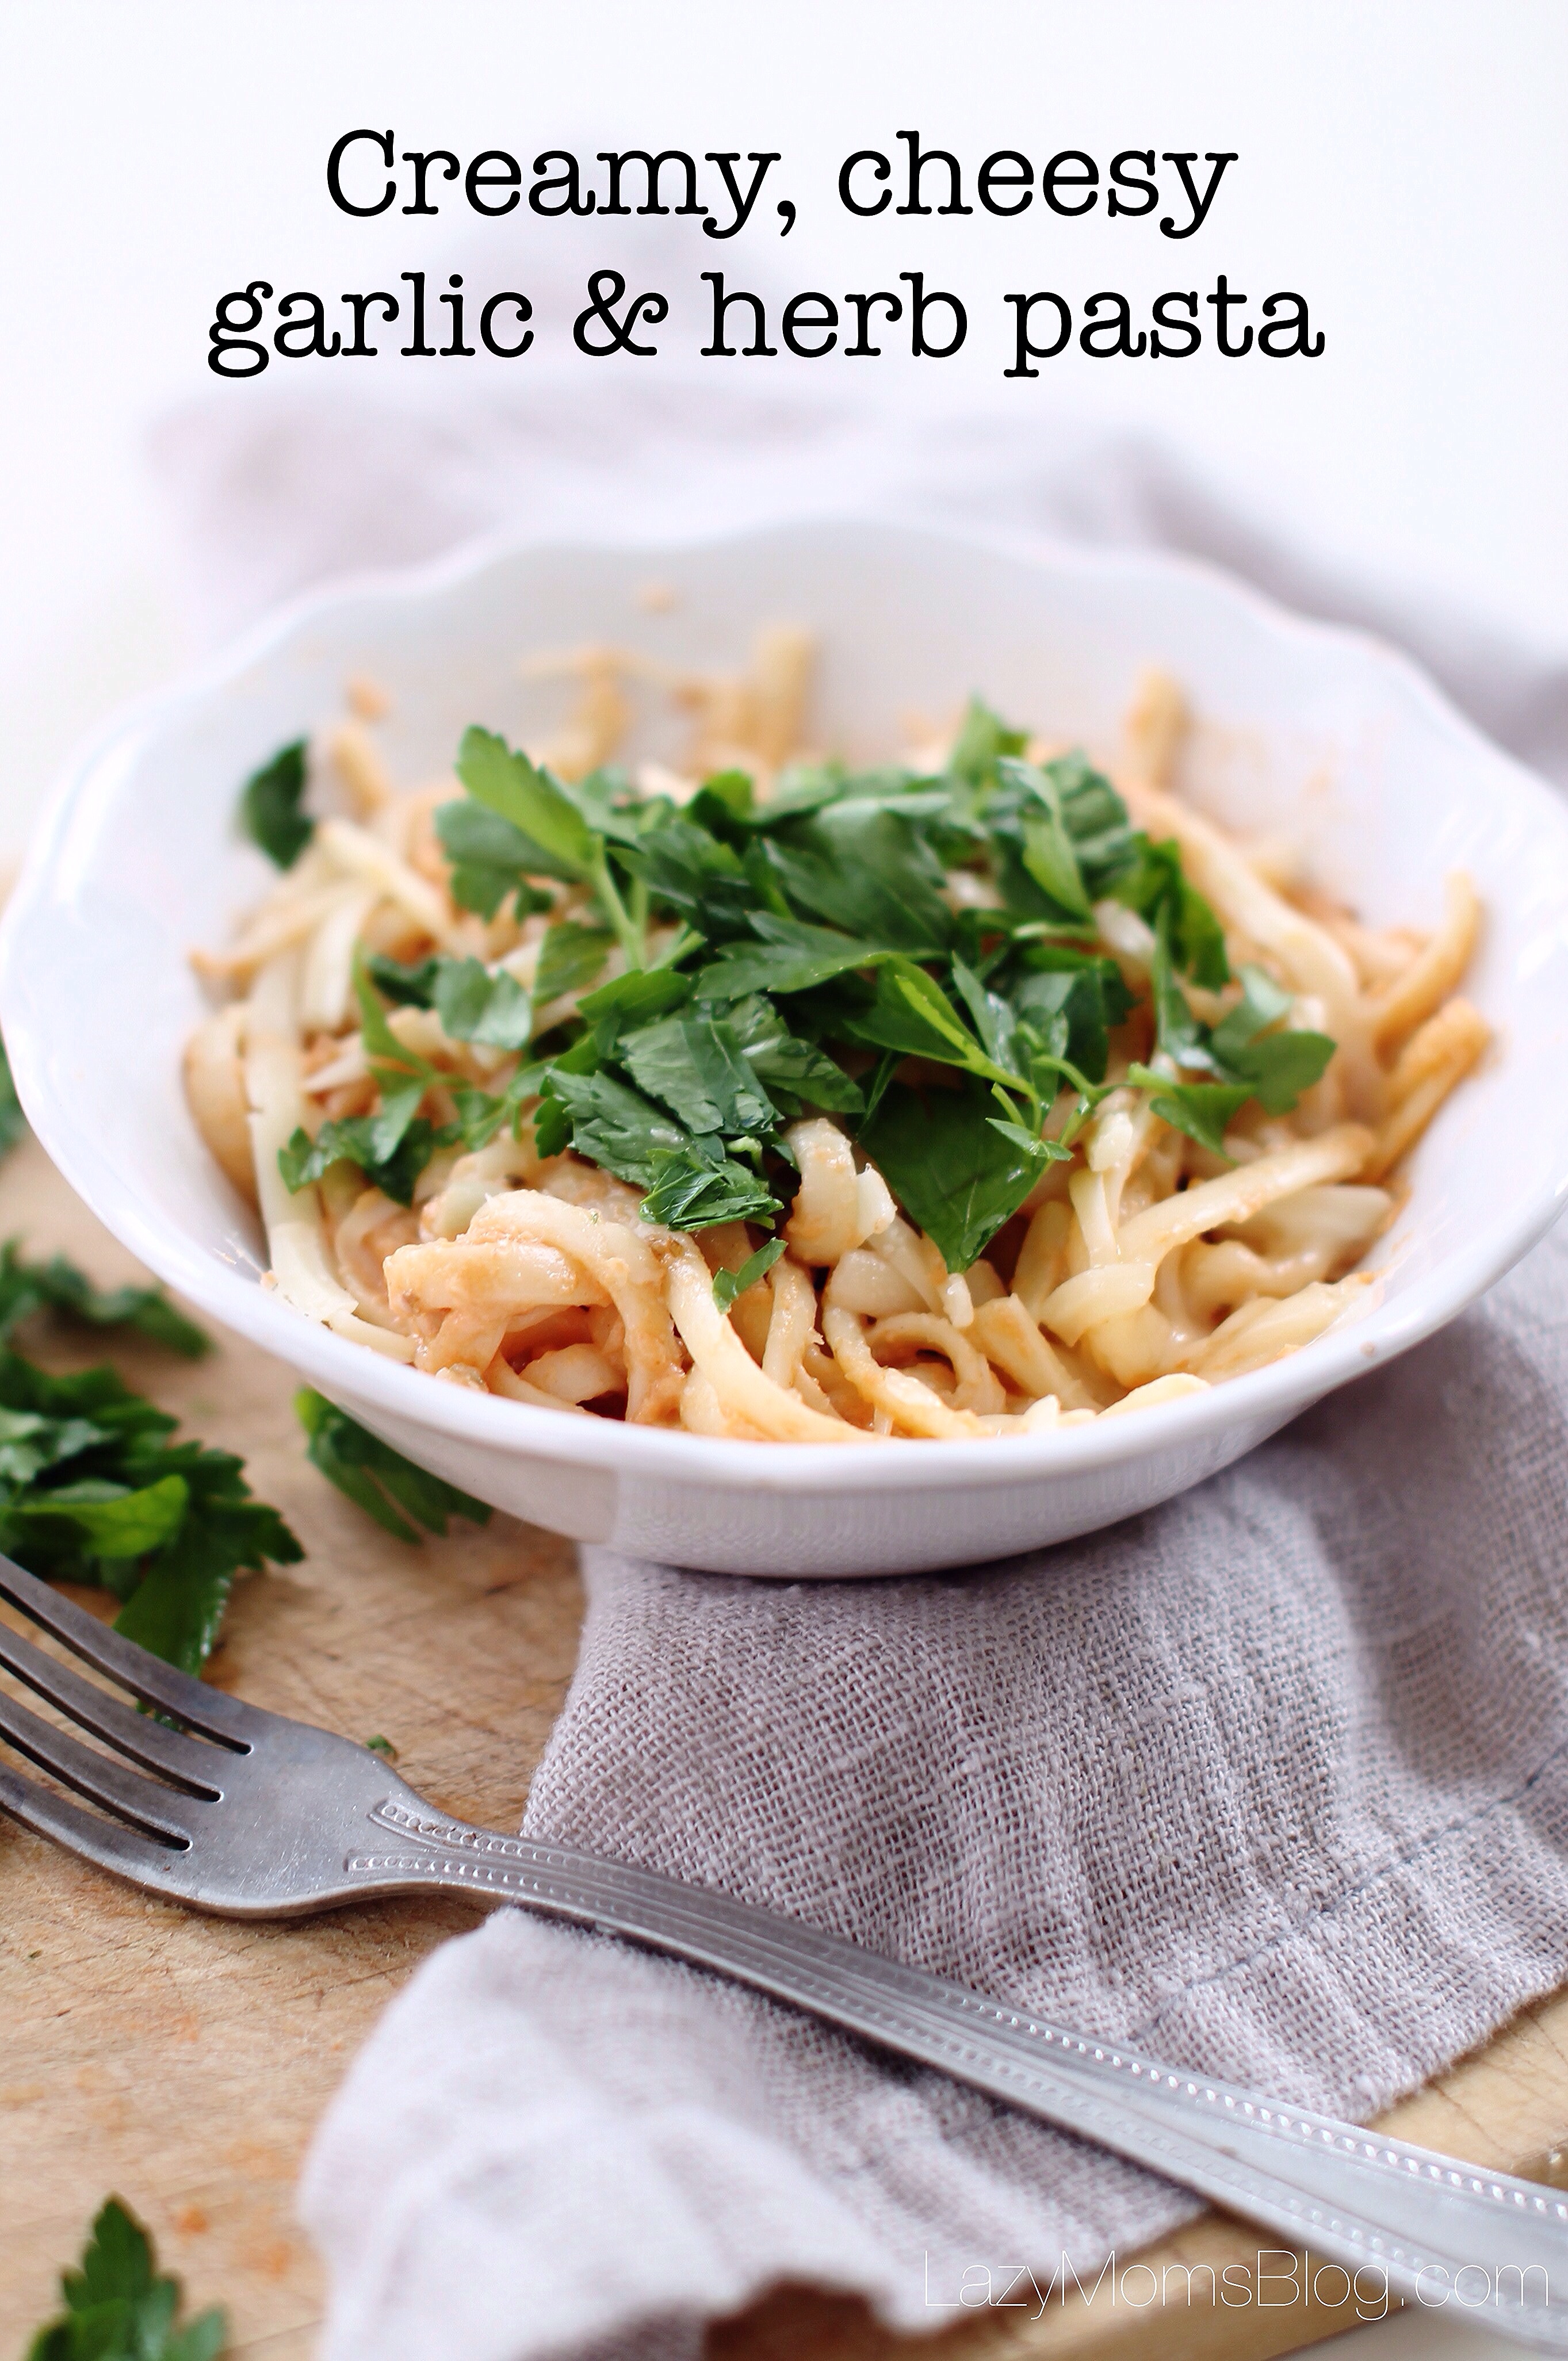 This creamy, cheesy garlic and herb pasta, is the best pasta recipe ever! The one that you'll want to make over and over again!  